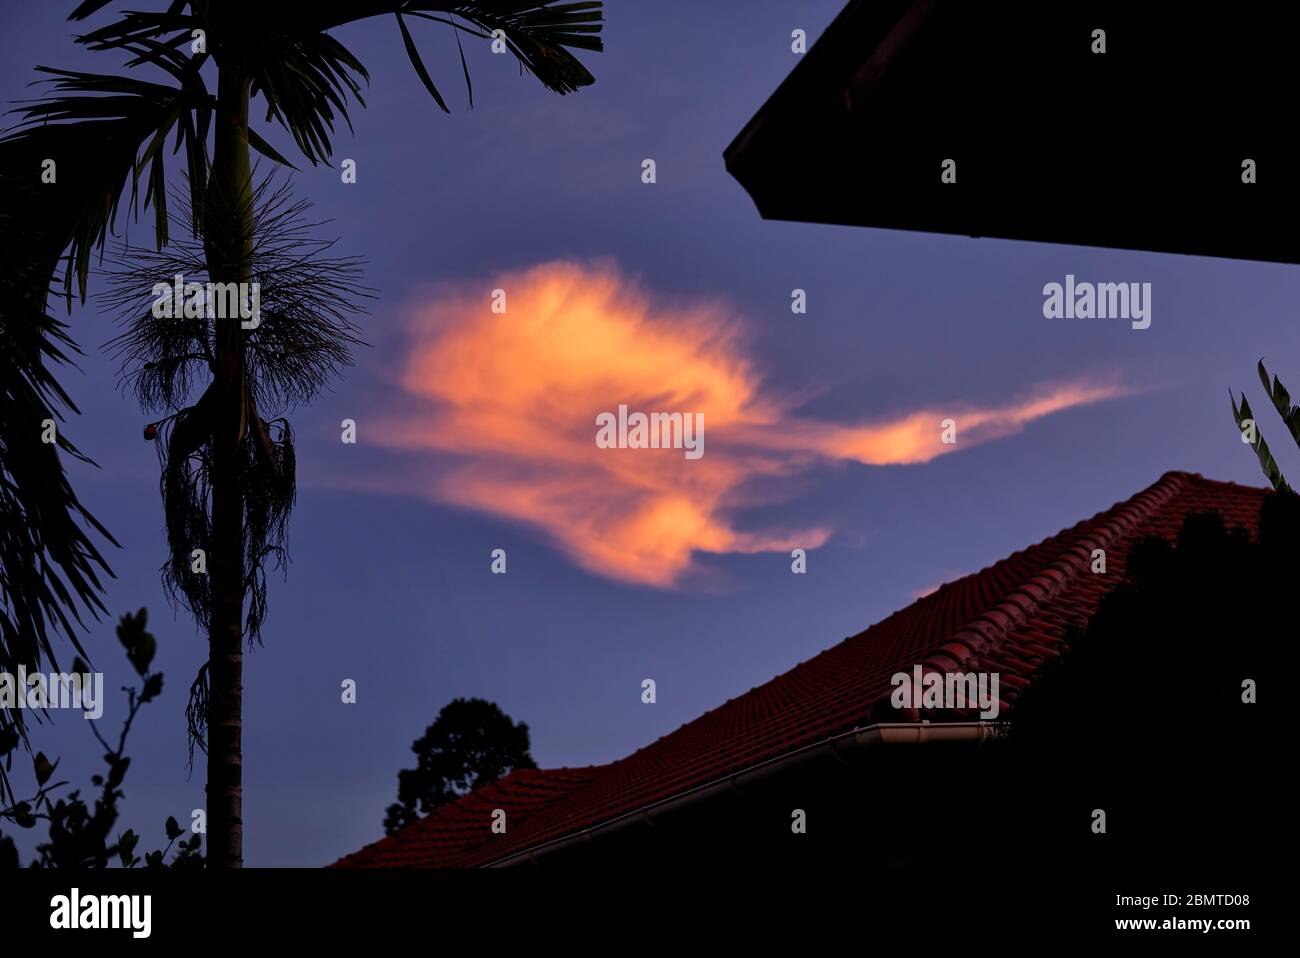 Dramatic sky at night with the setting sun creating a dramatic orange fiery cloud effect Stock Photo